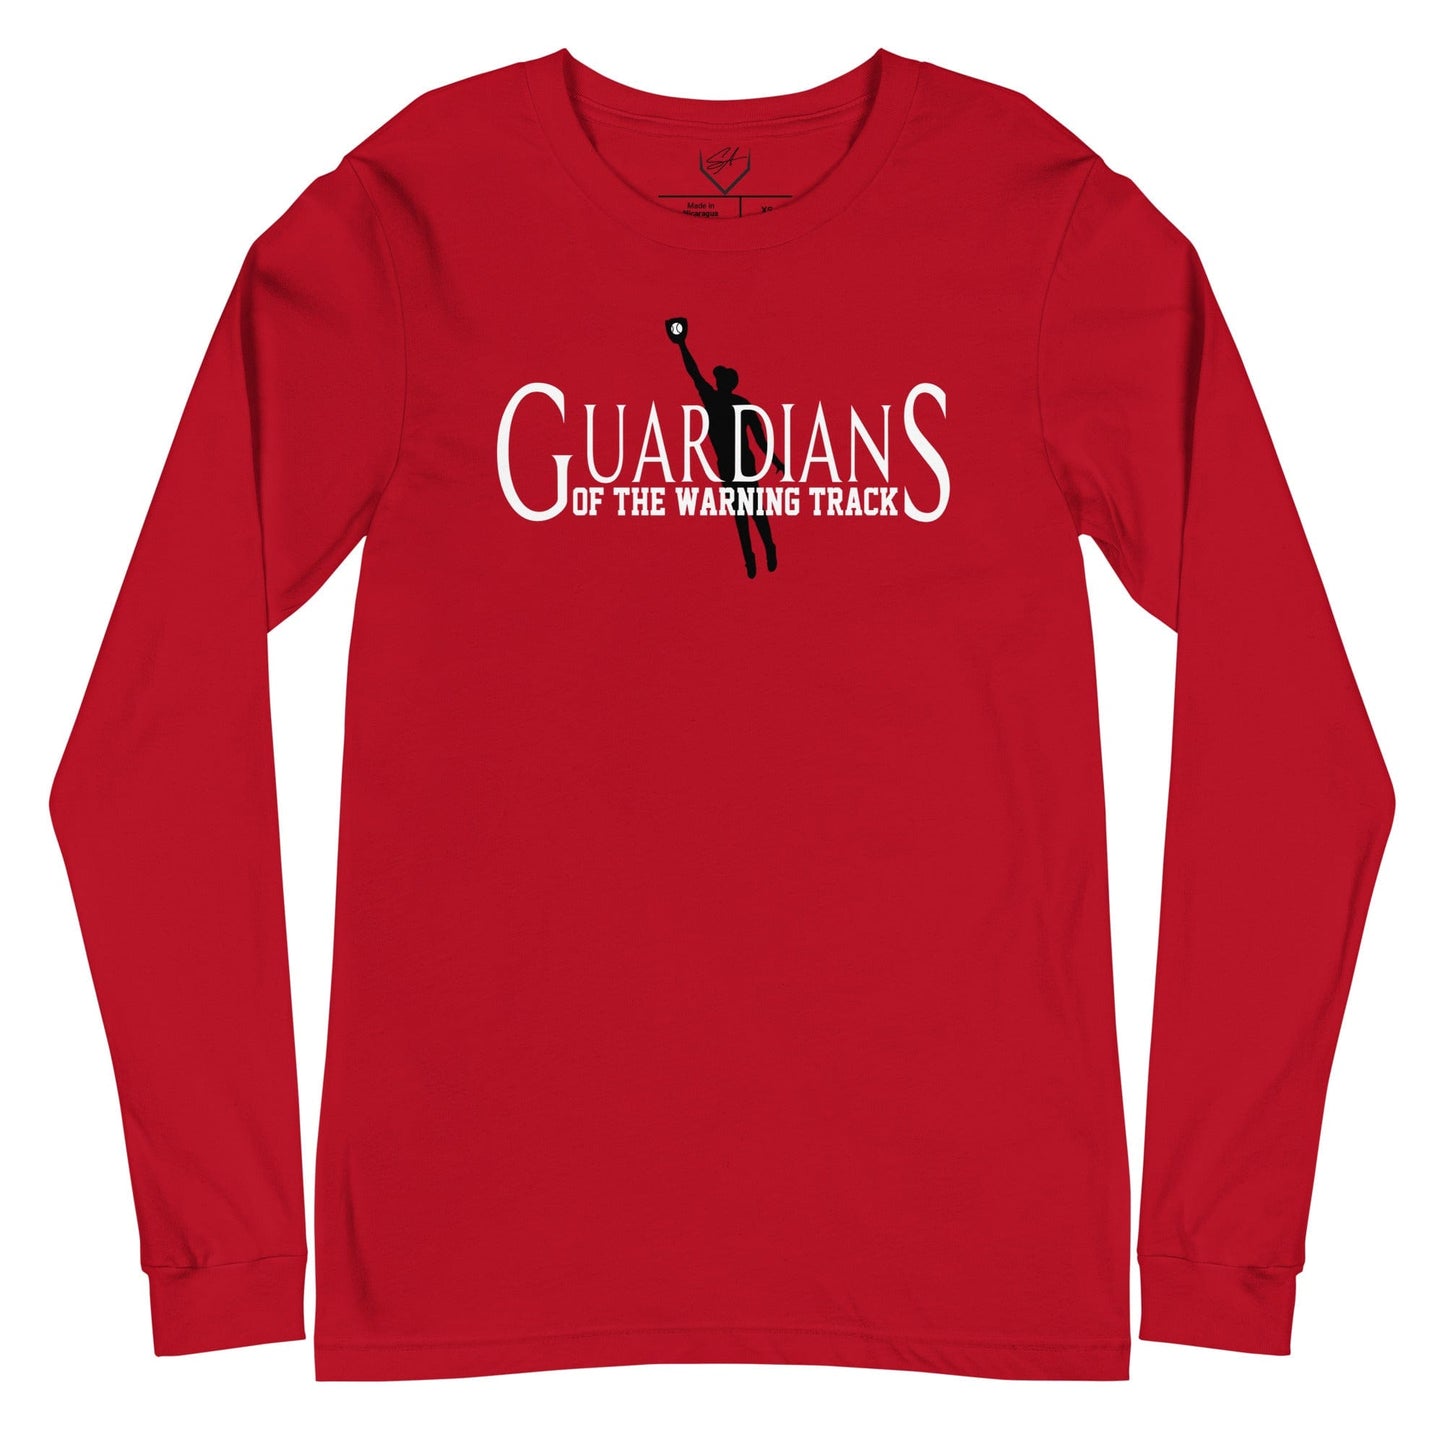 Guardians Of The Warning Track - Adult Long Sleeve